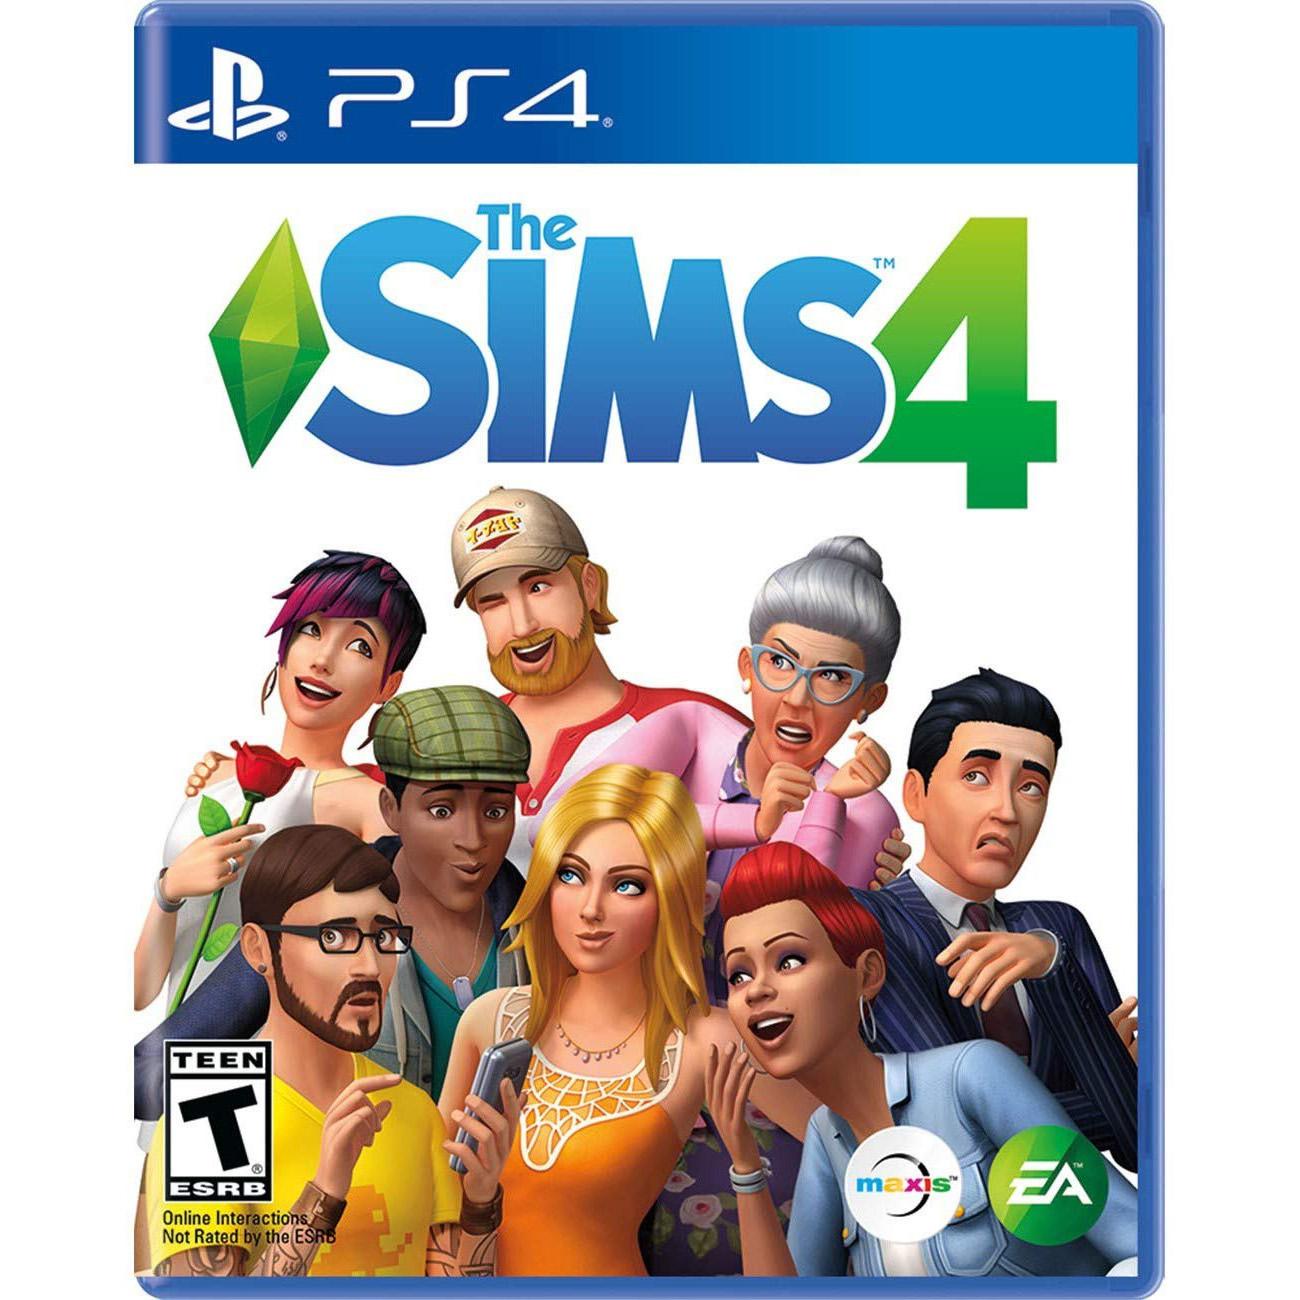 The Sims 4 PS4 for $9.99